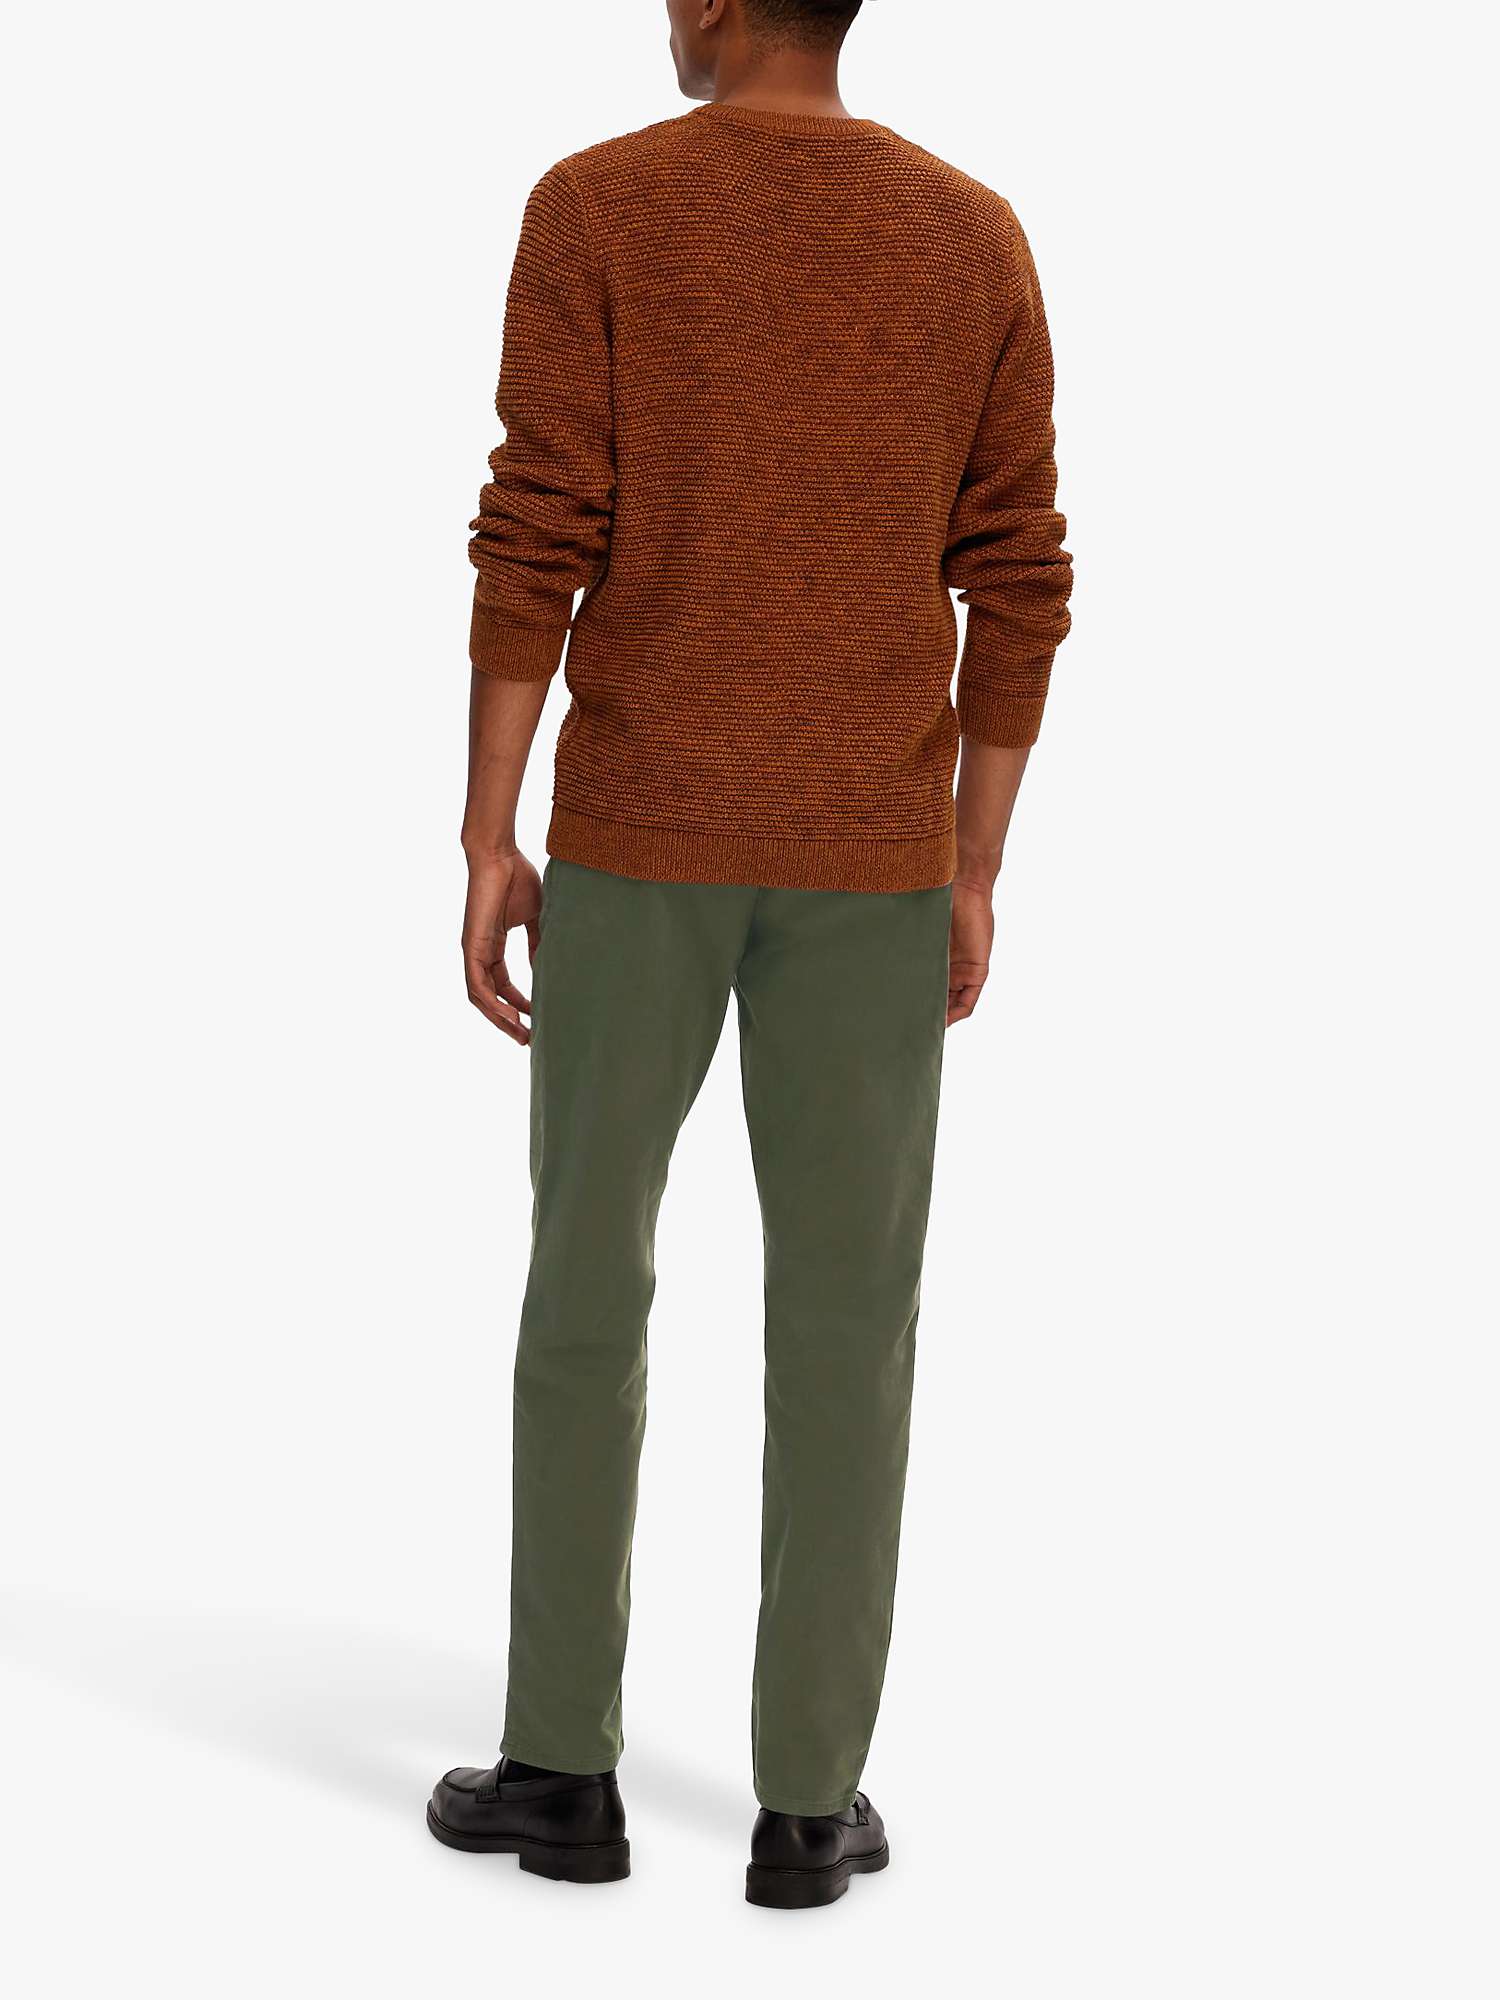 Buy SELECTED HOMME Organic Cotton Bubble Stitch Jumper Online at johnlewis.com